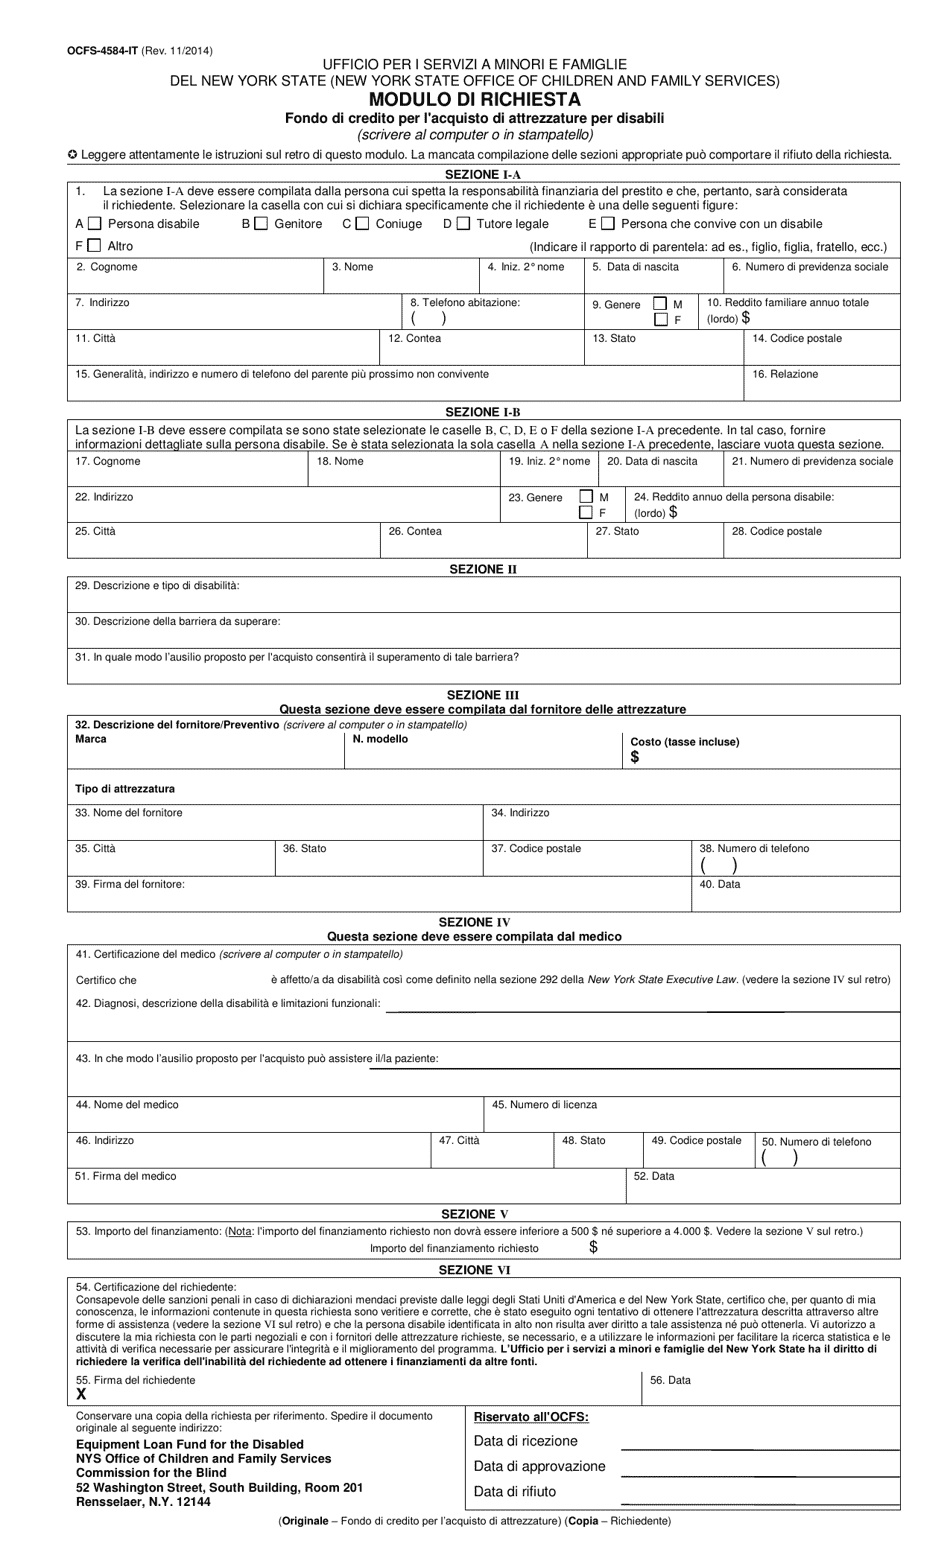 Form OCFS-4584-IT Application Form for Equipment Loan Fund for the Disabled - New York (Italian), Page 1